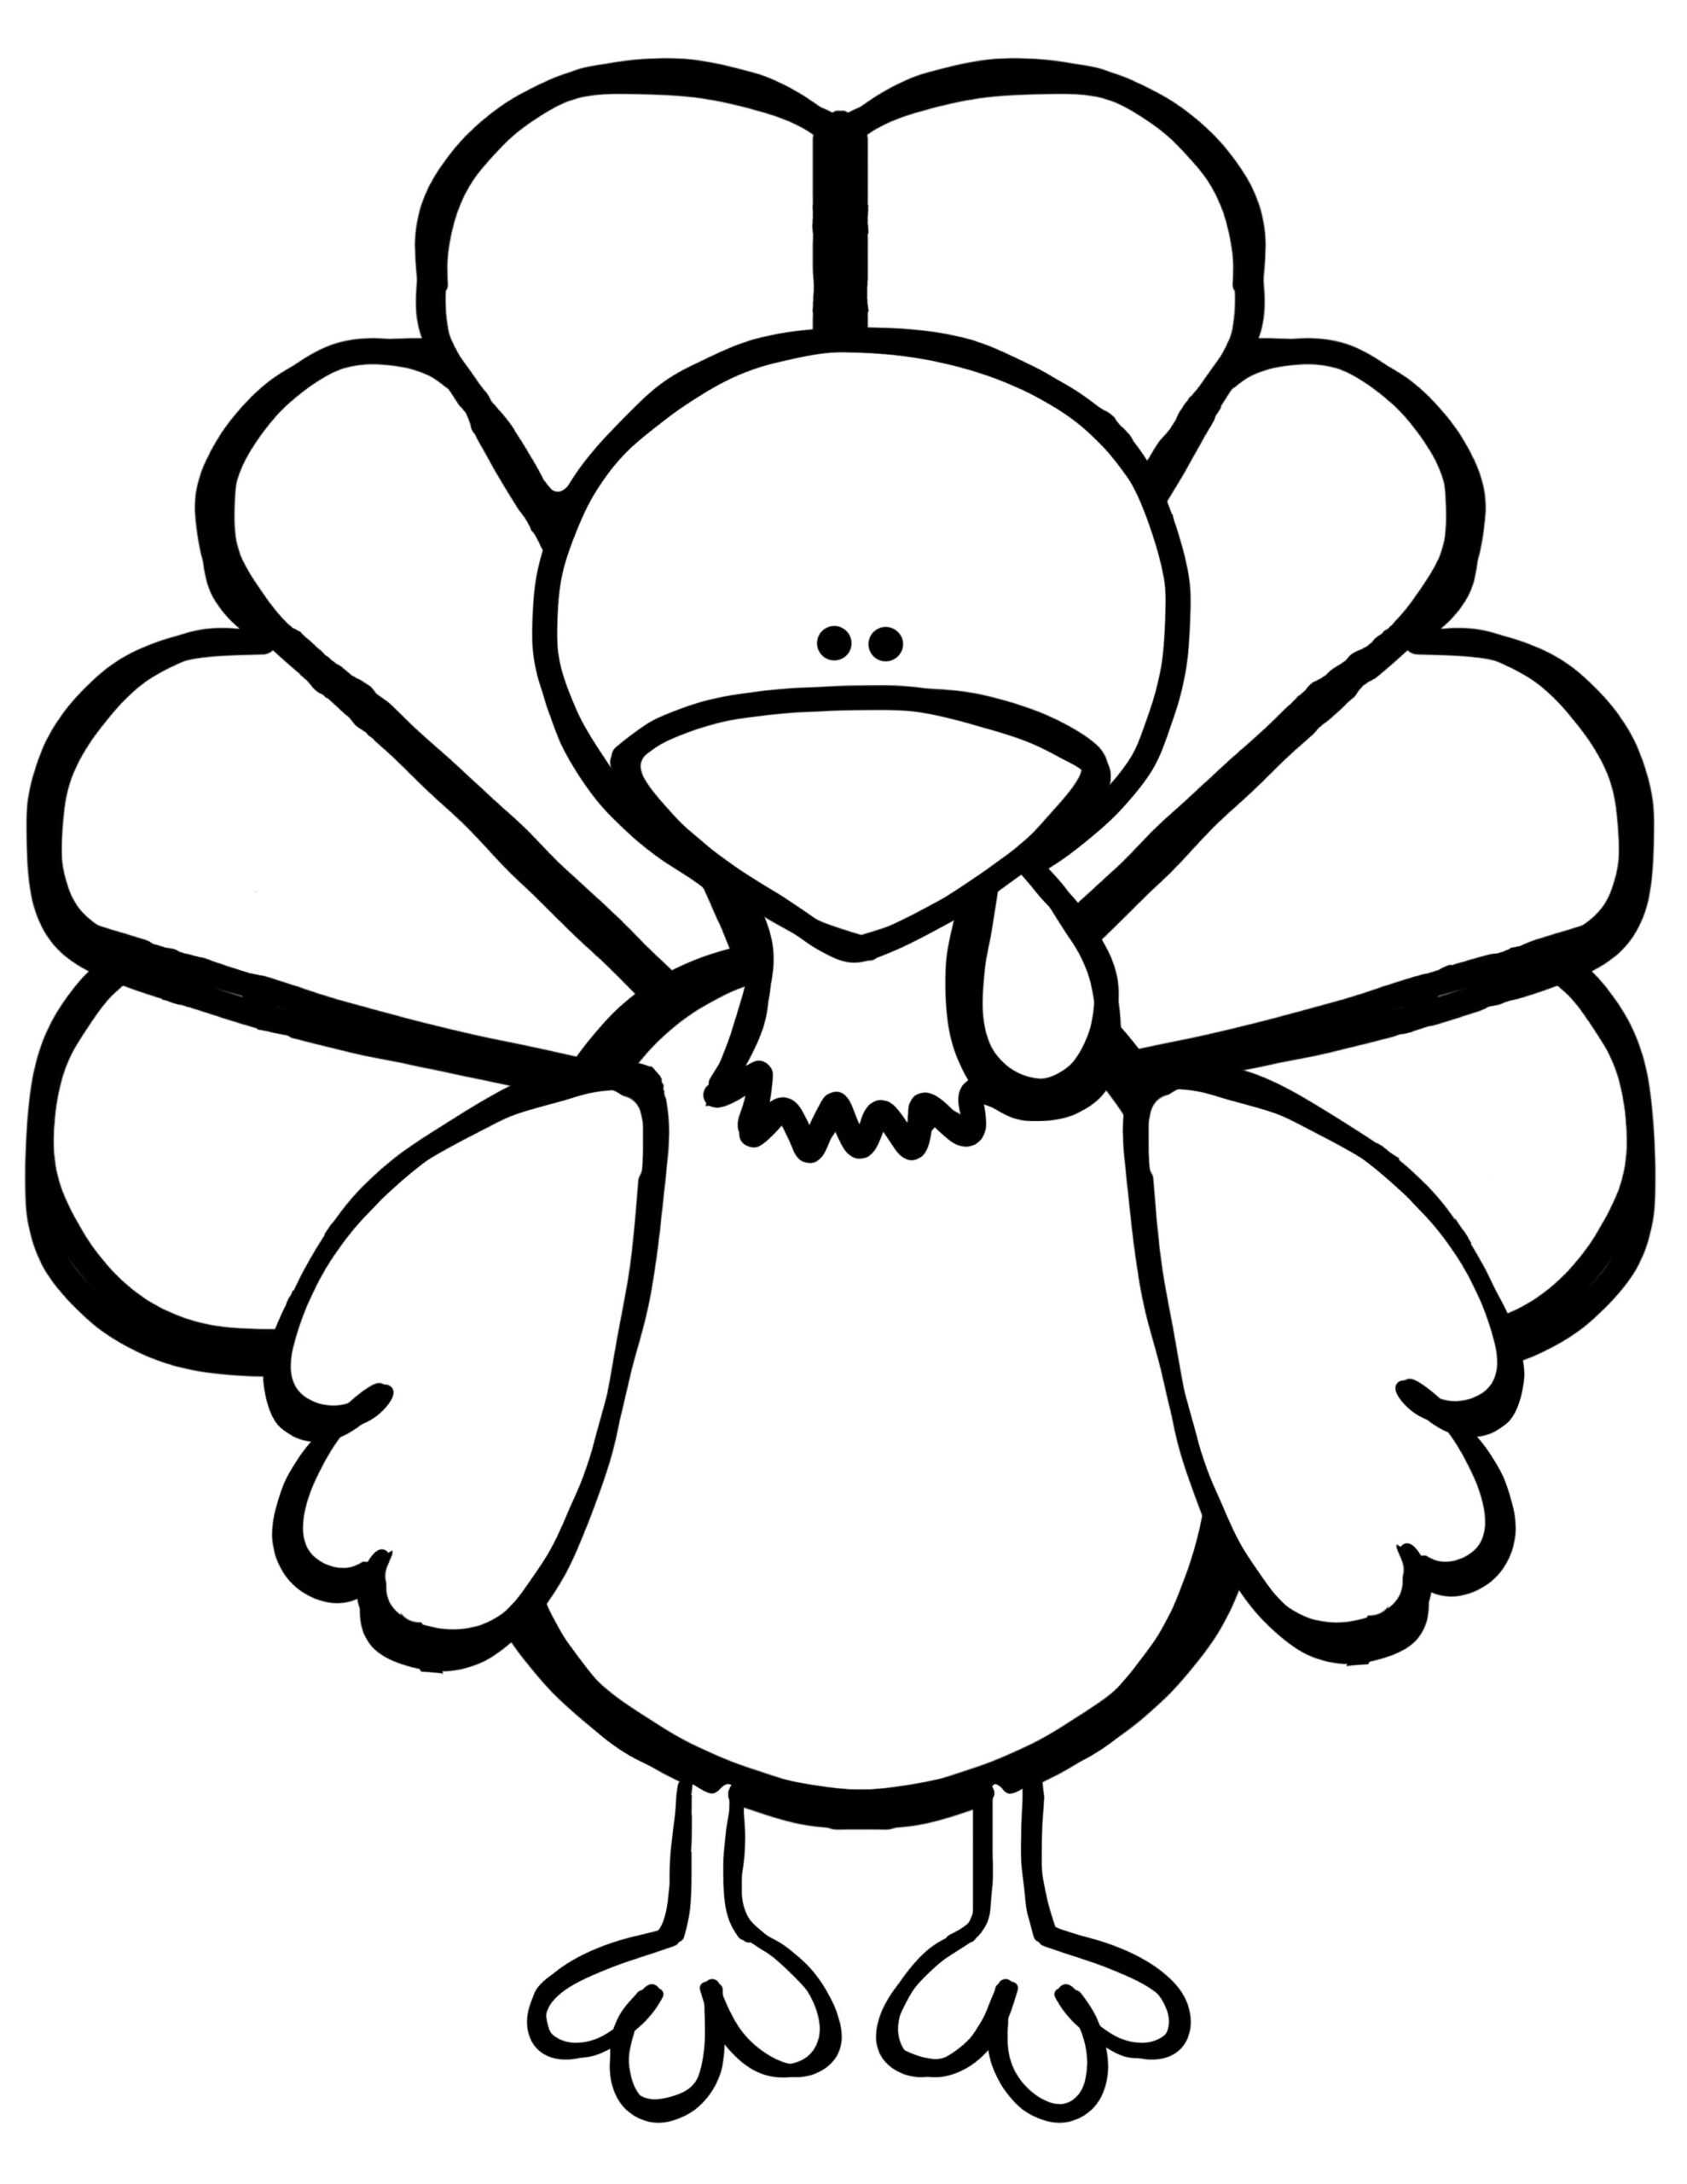 Everything You Need For The Turkey Disguise Project - Kids For Blank Turkey Template